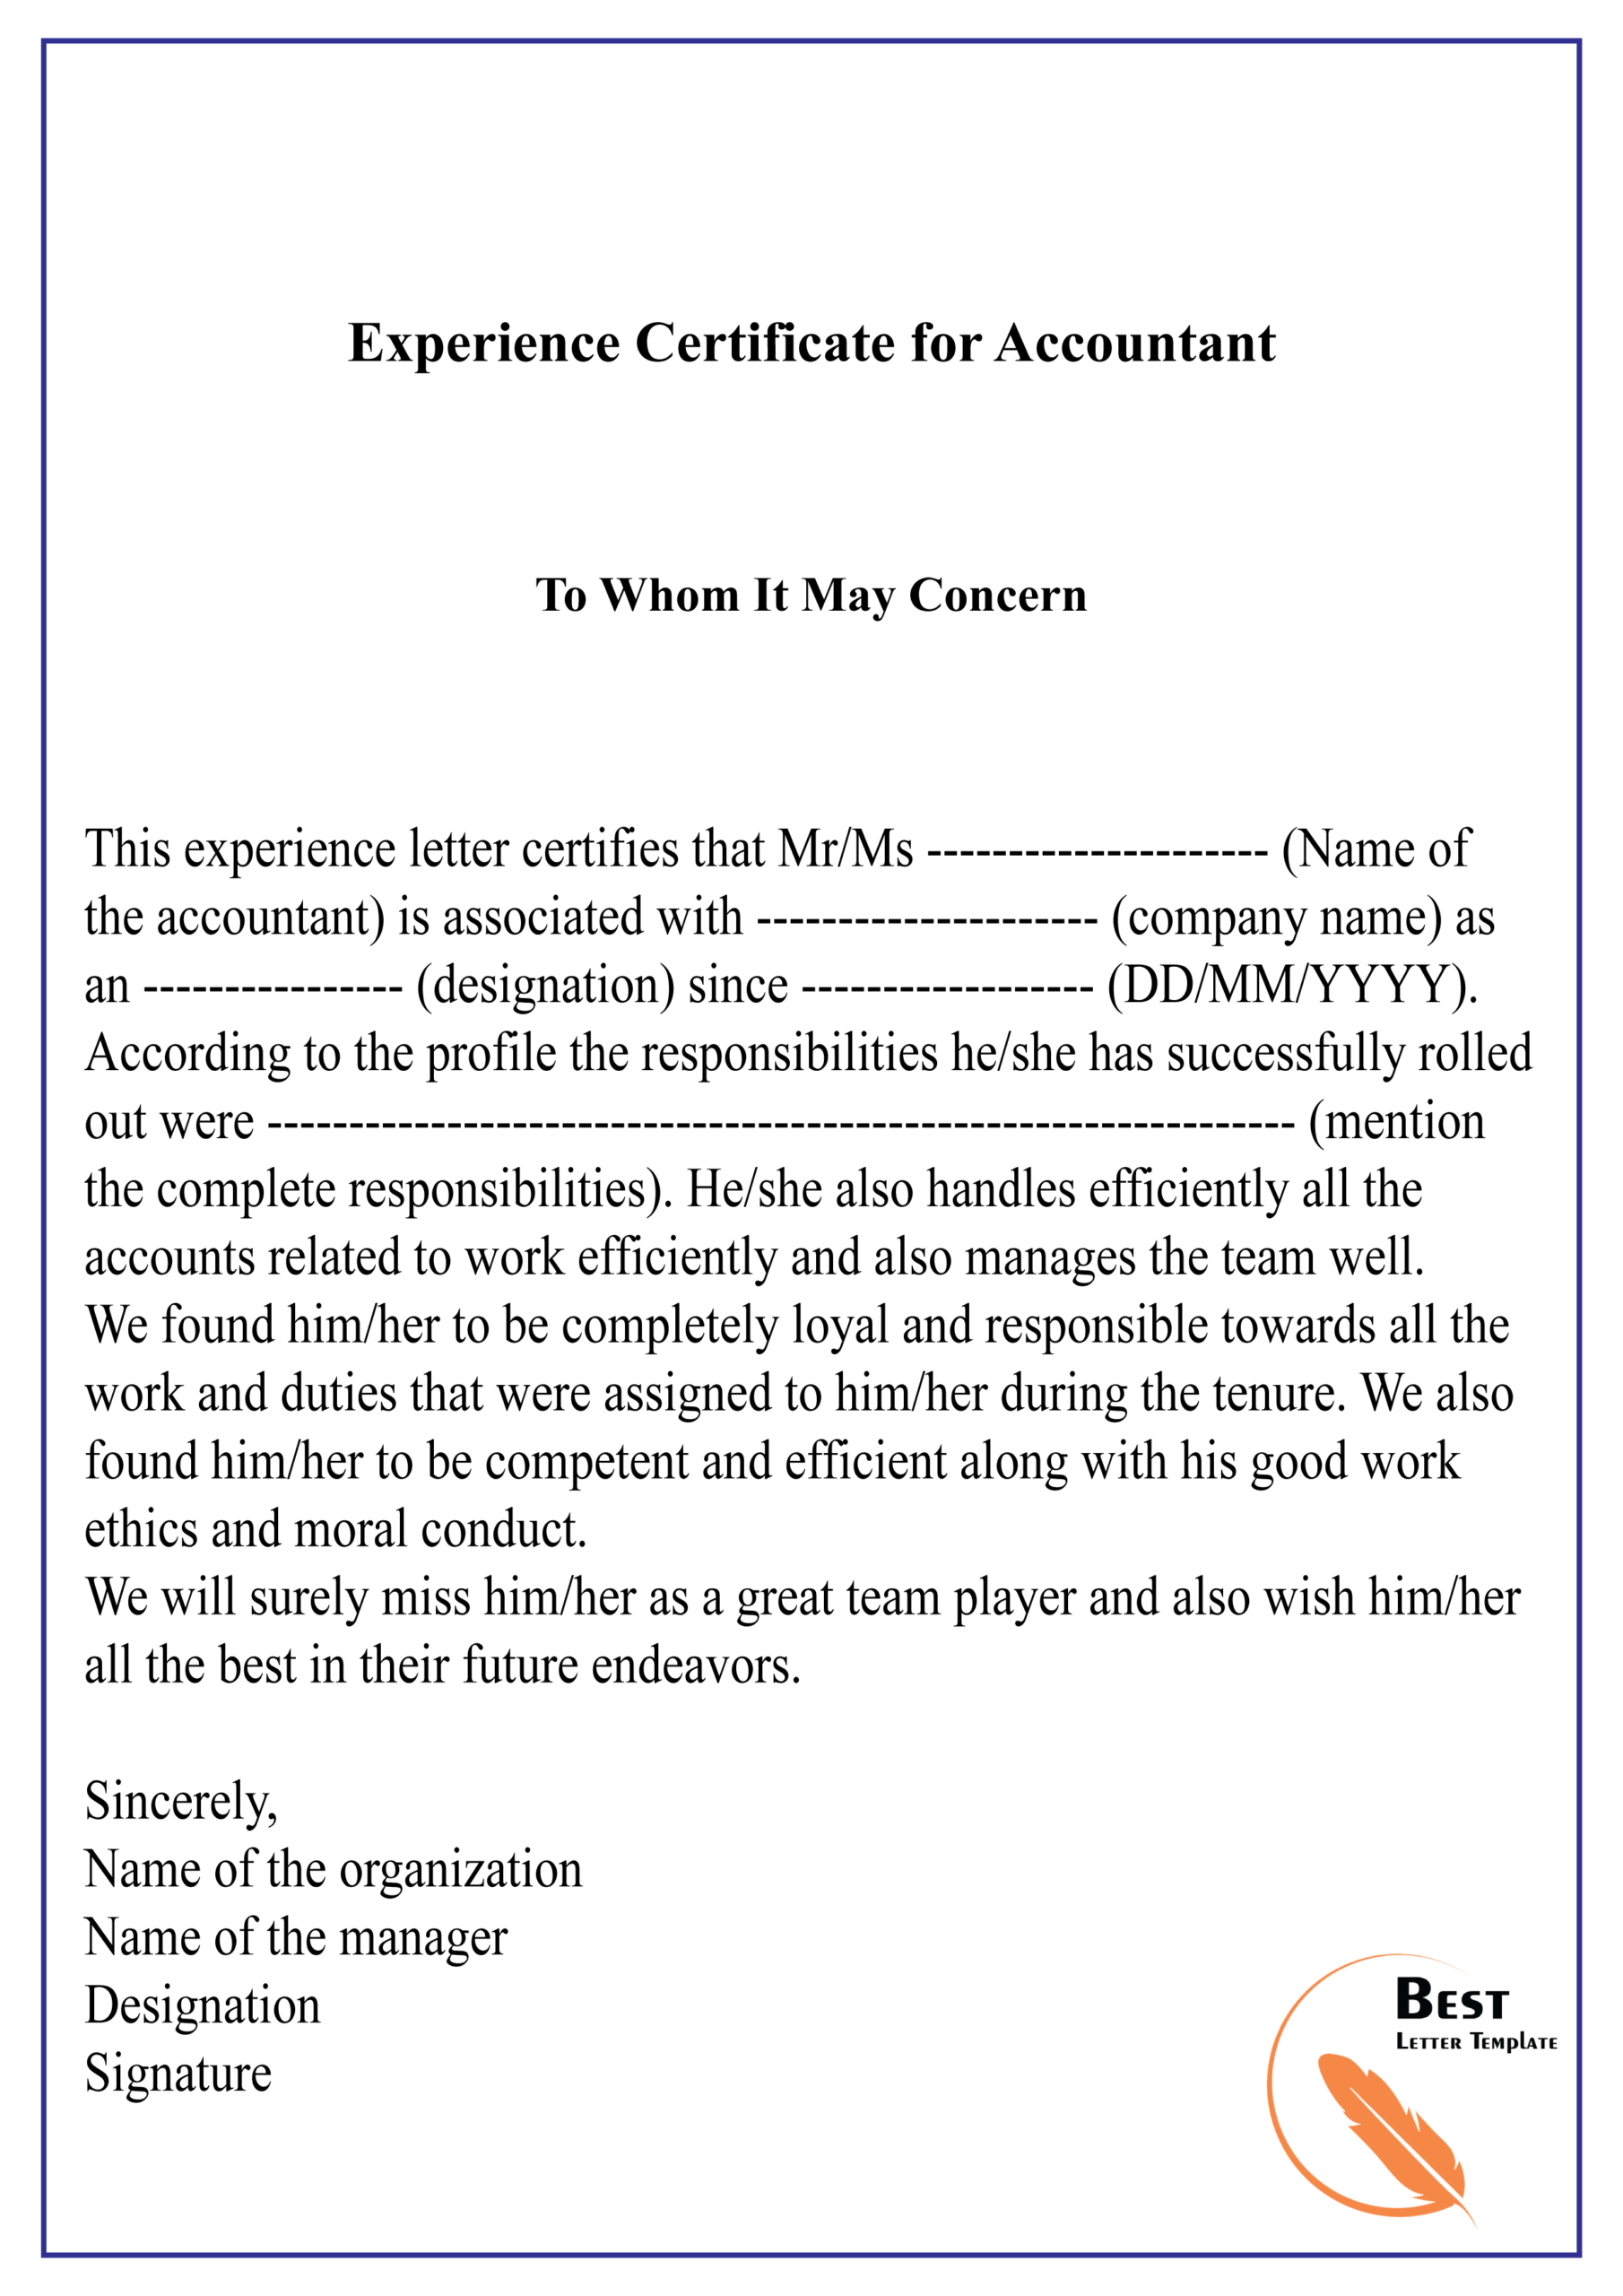 Experience Certificate For Accountant 01 | Best Letter Template Inside Certificate Of Experience Template